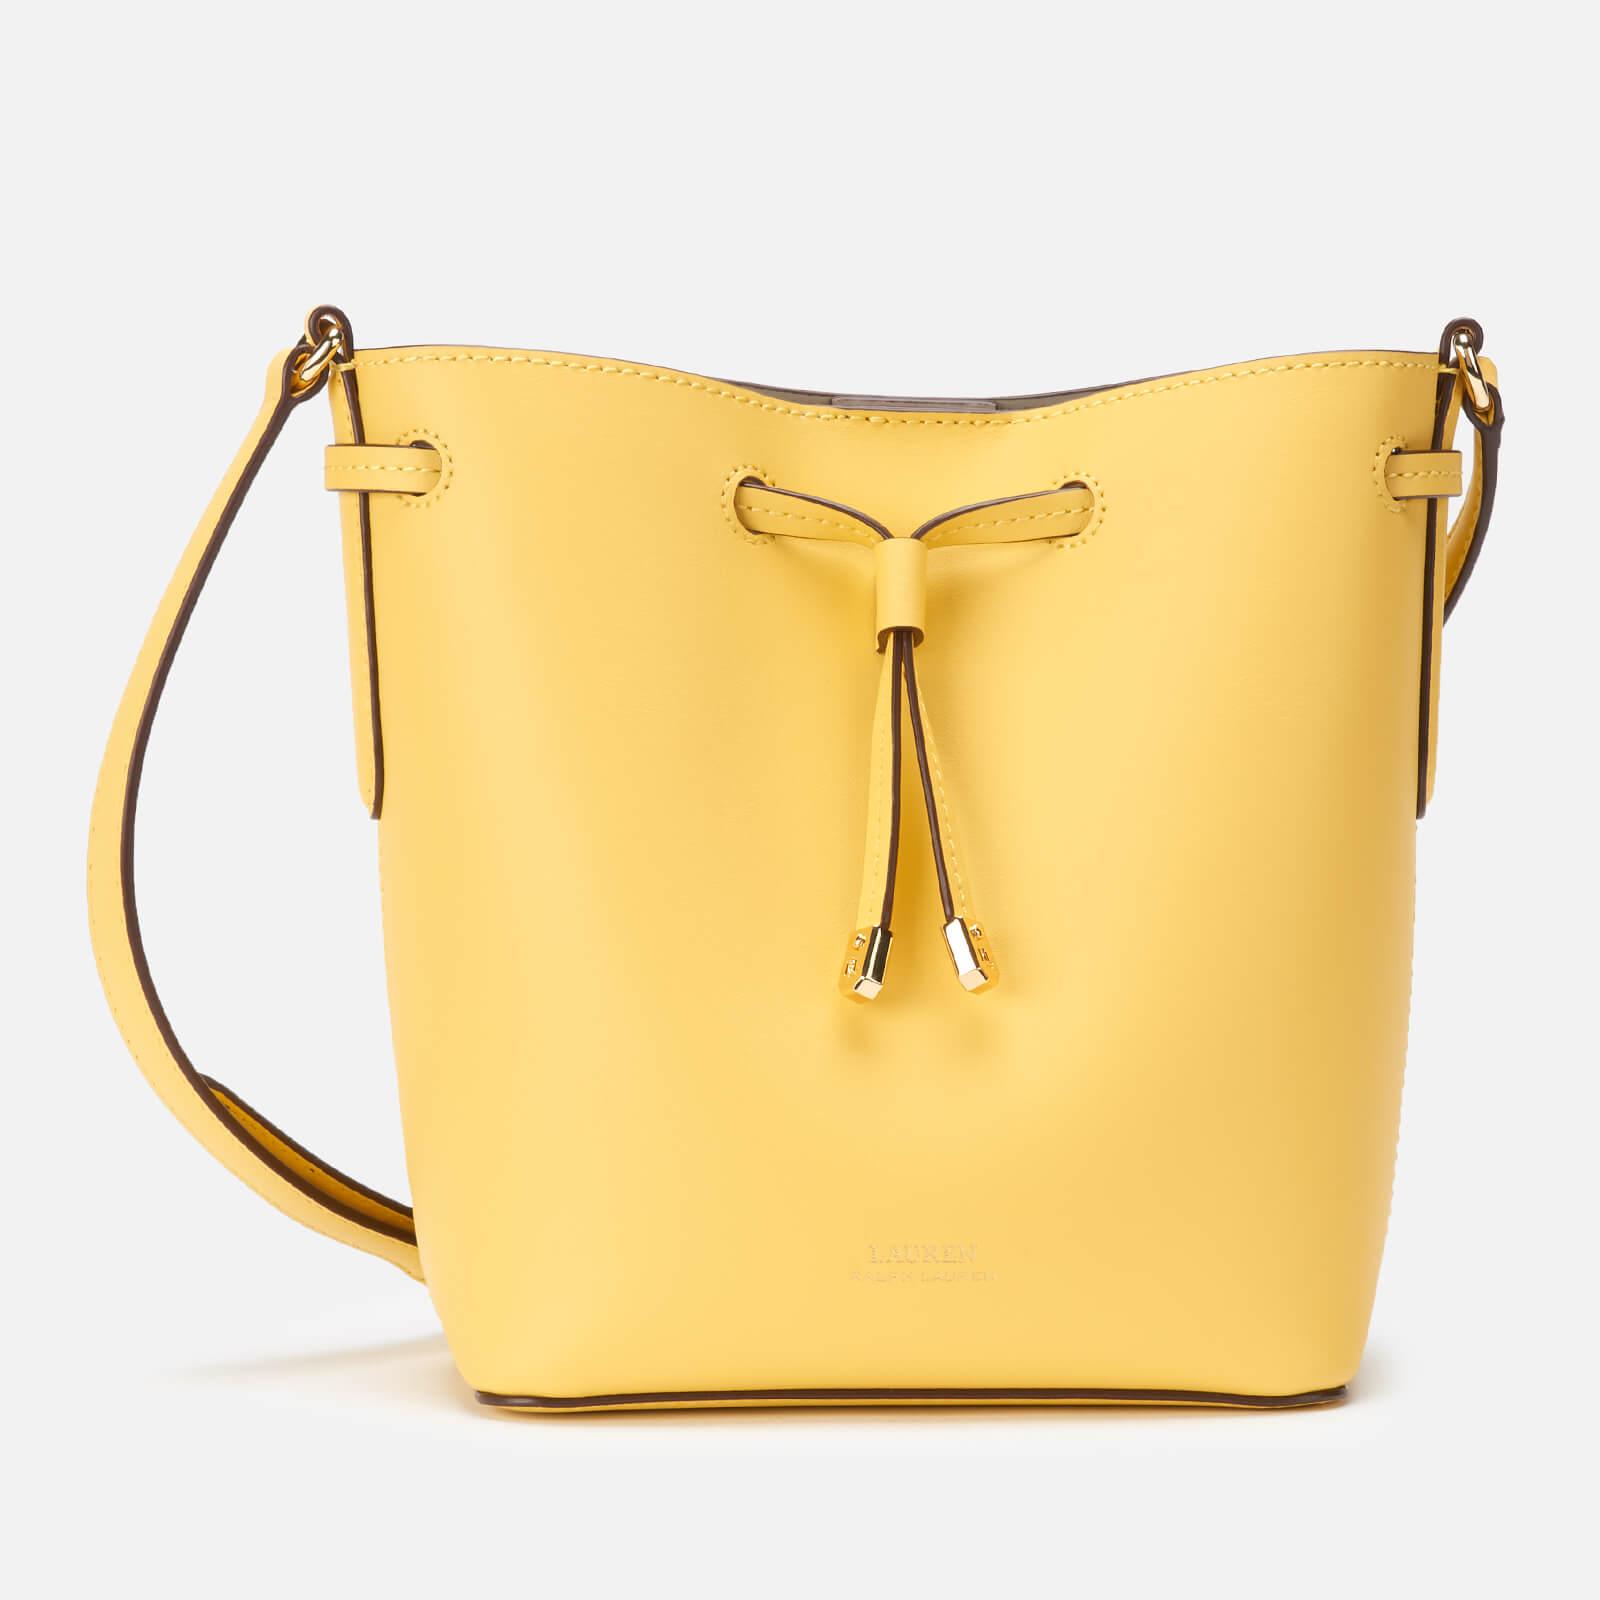 Accor abscess I wash my clothes Lauren by Ralph Lauren Super Smooth Leather Debby Drawstring Bag in Yellow  | Lyst